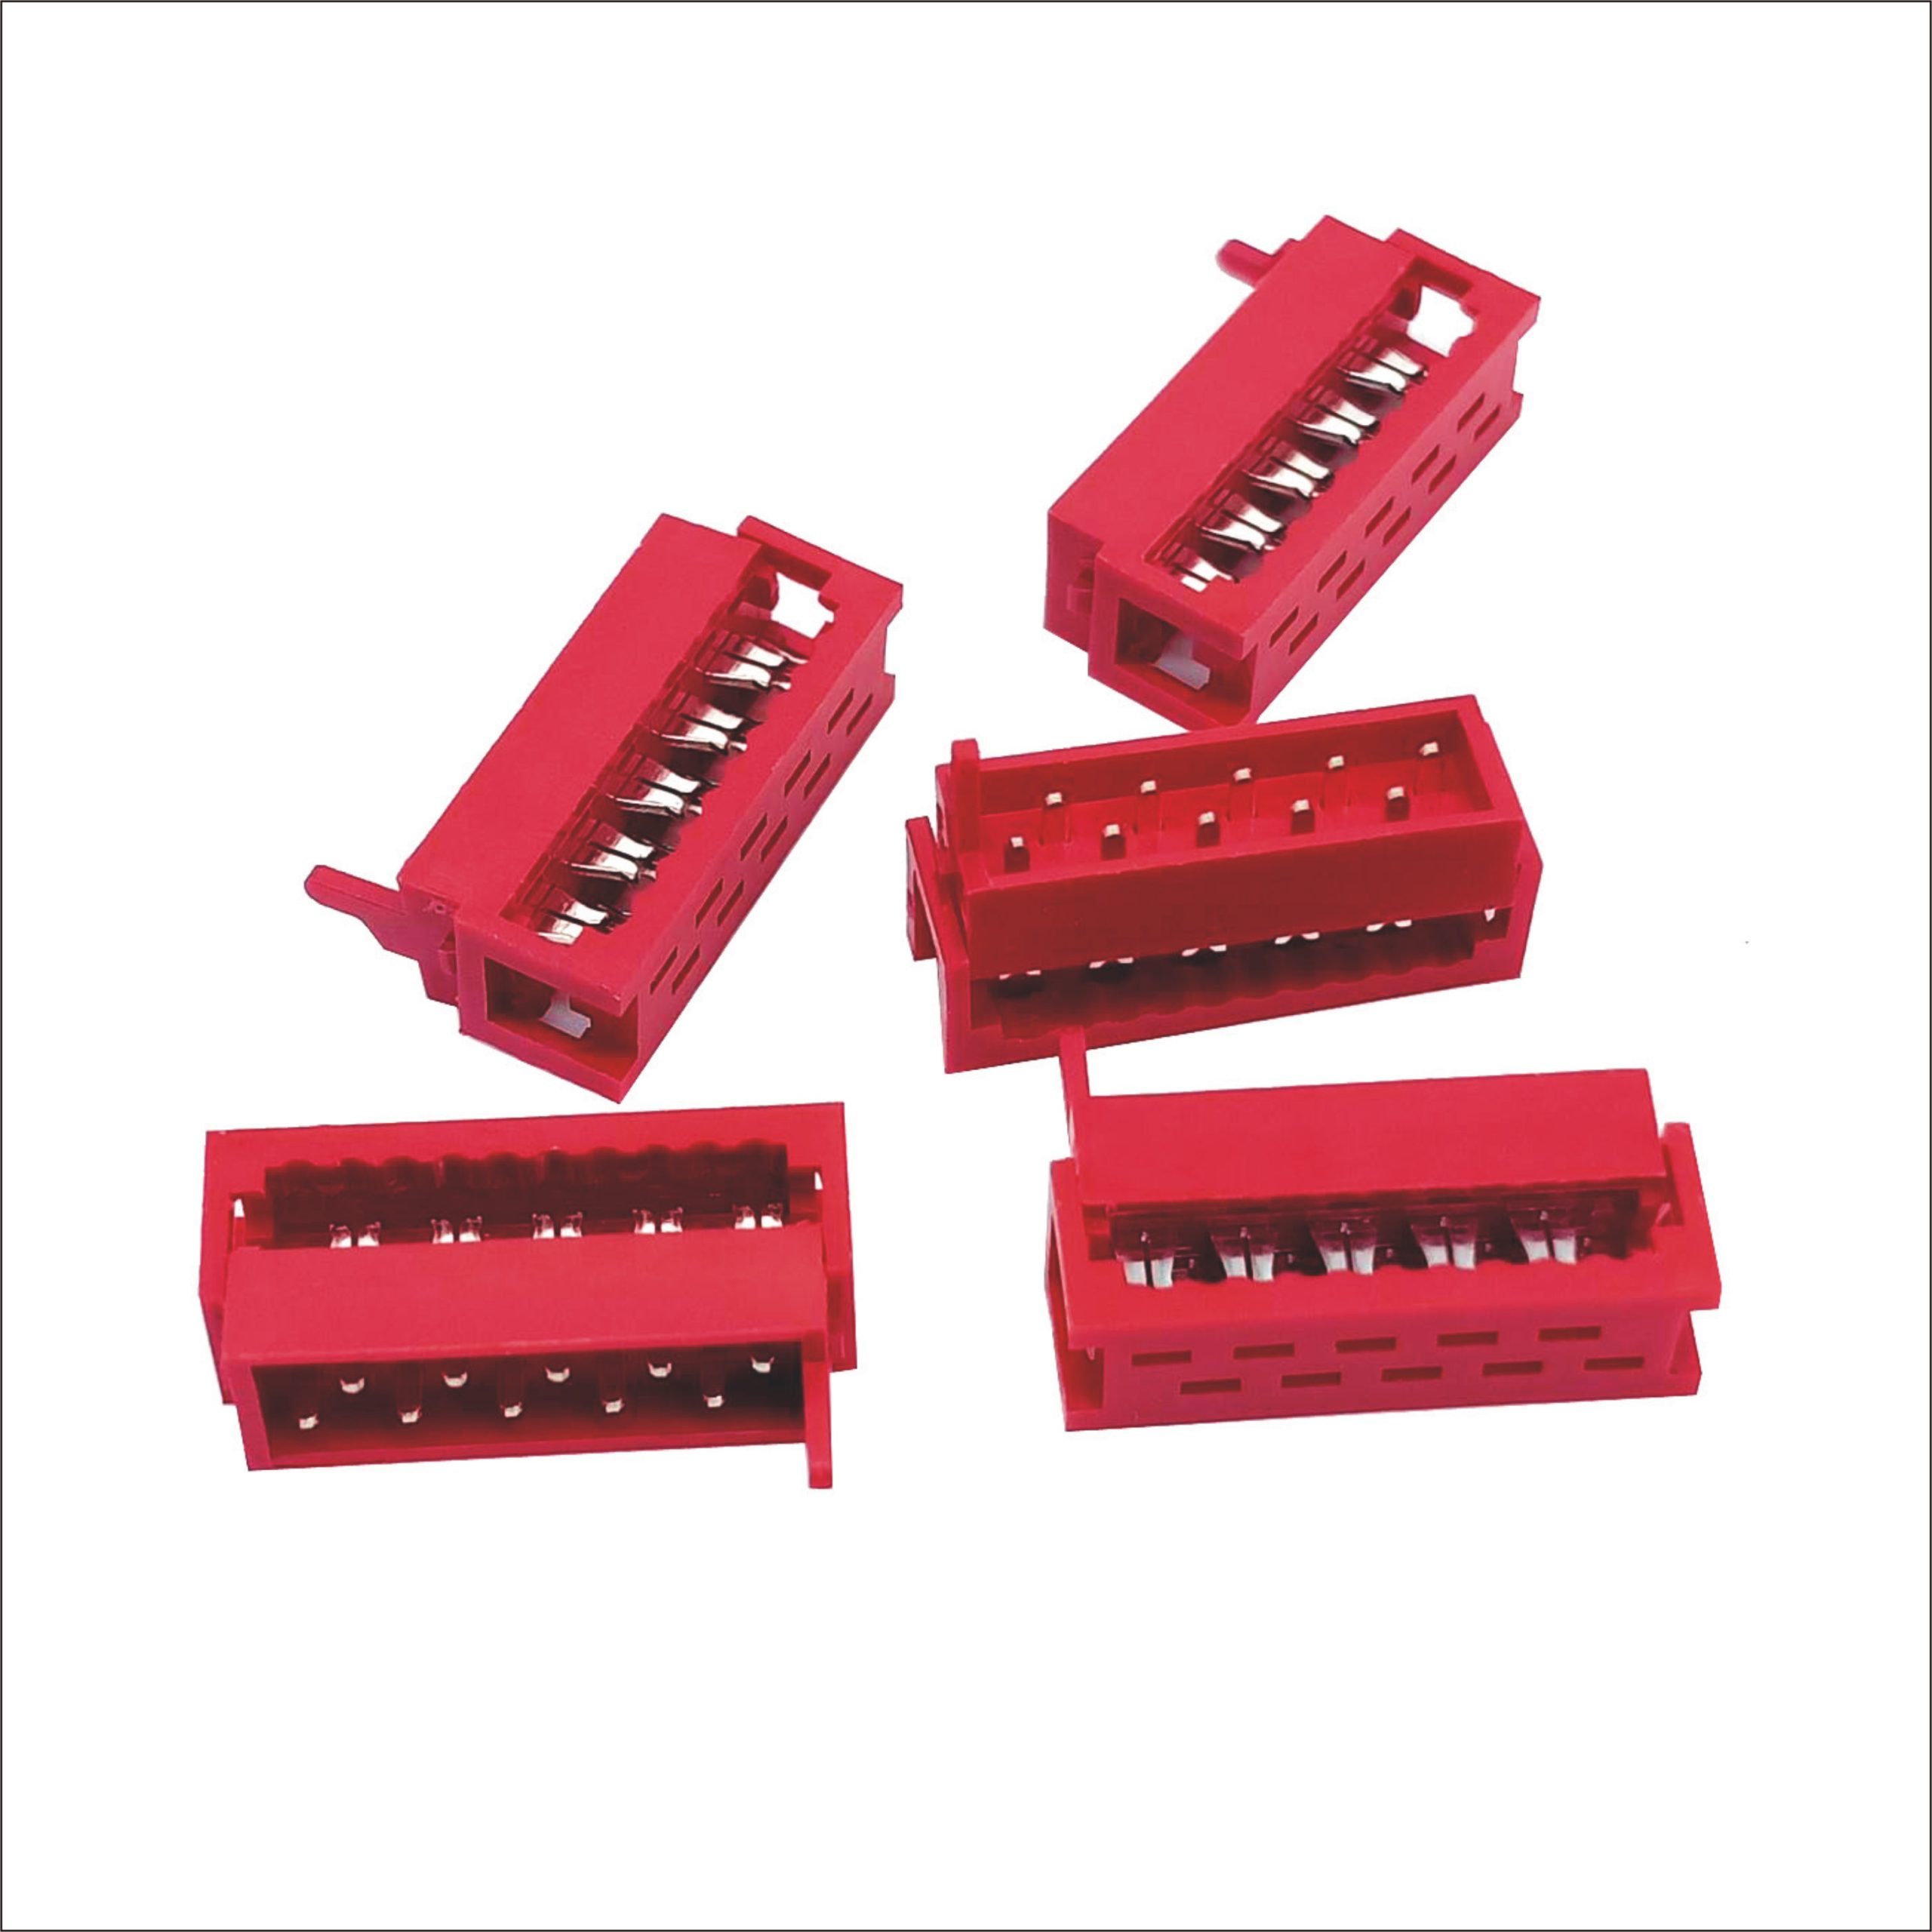 Micro-Match 8-215083-0: High-Performance 10-Position IDC Connector Plug for Seamless Connectivity.